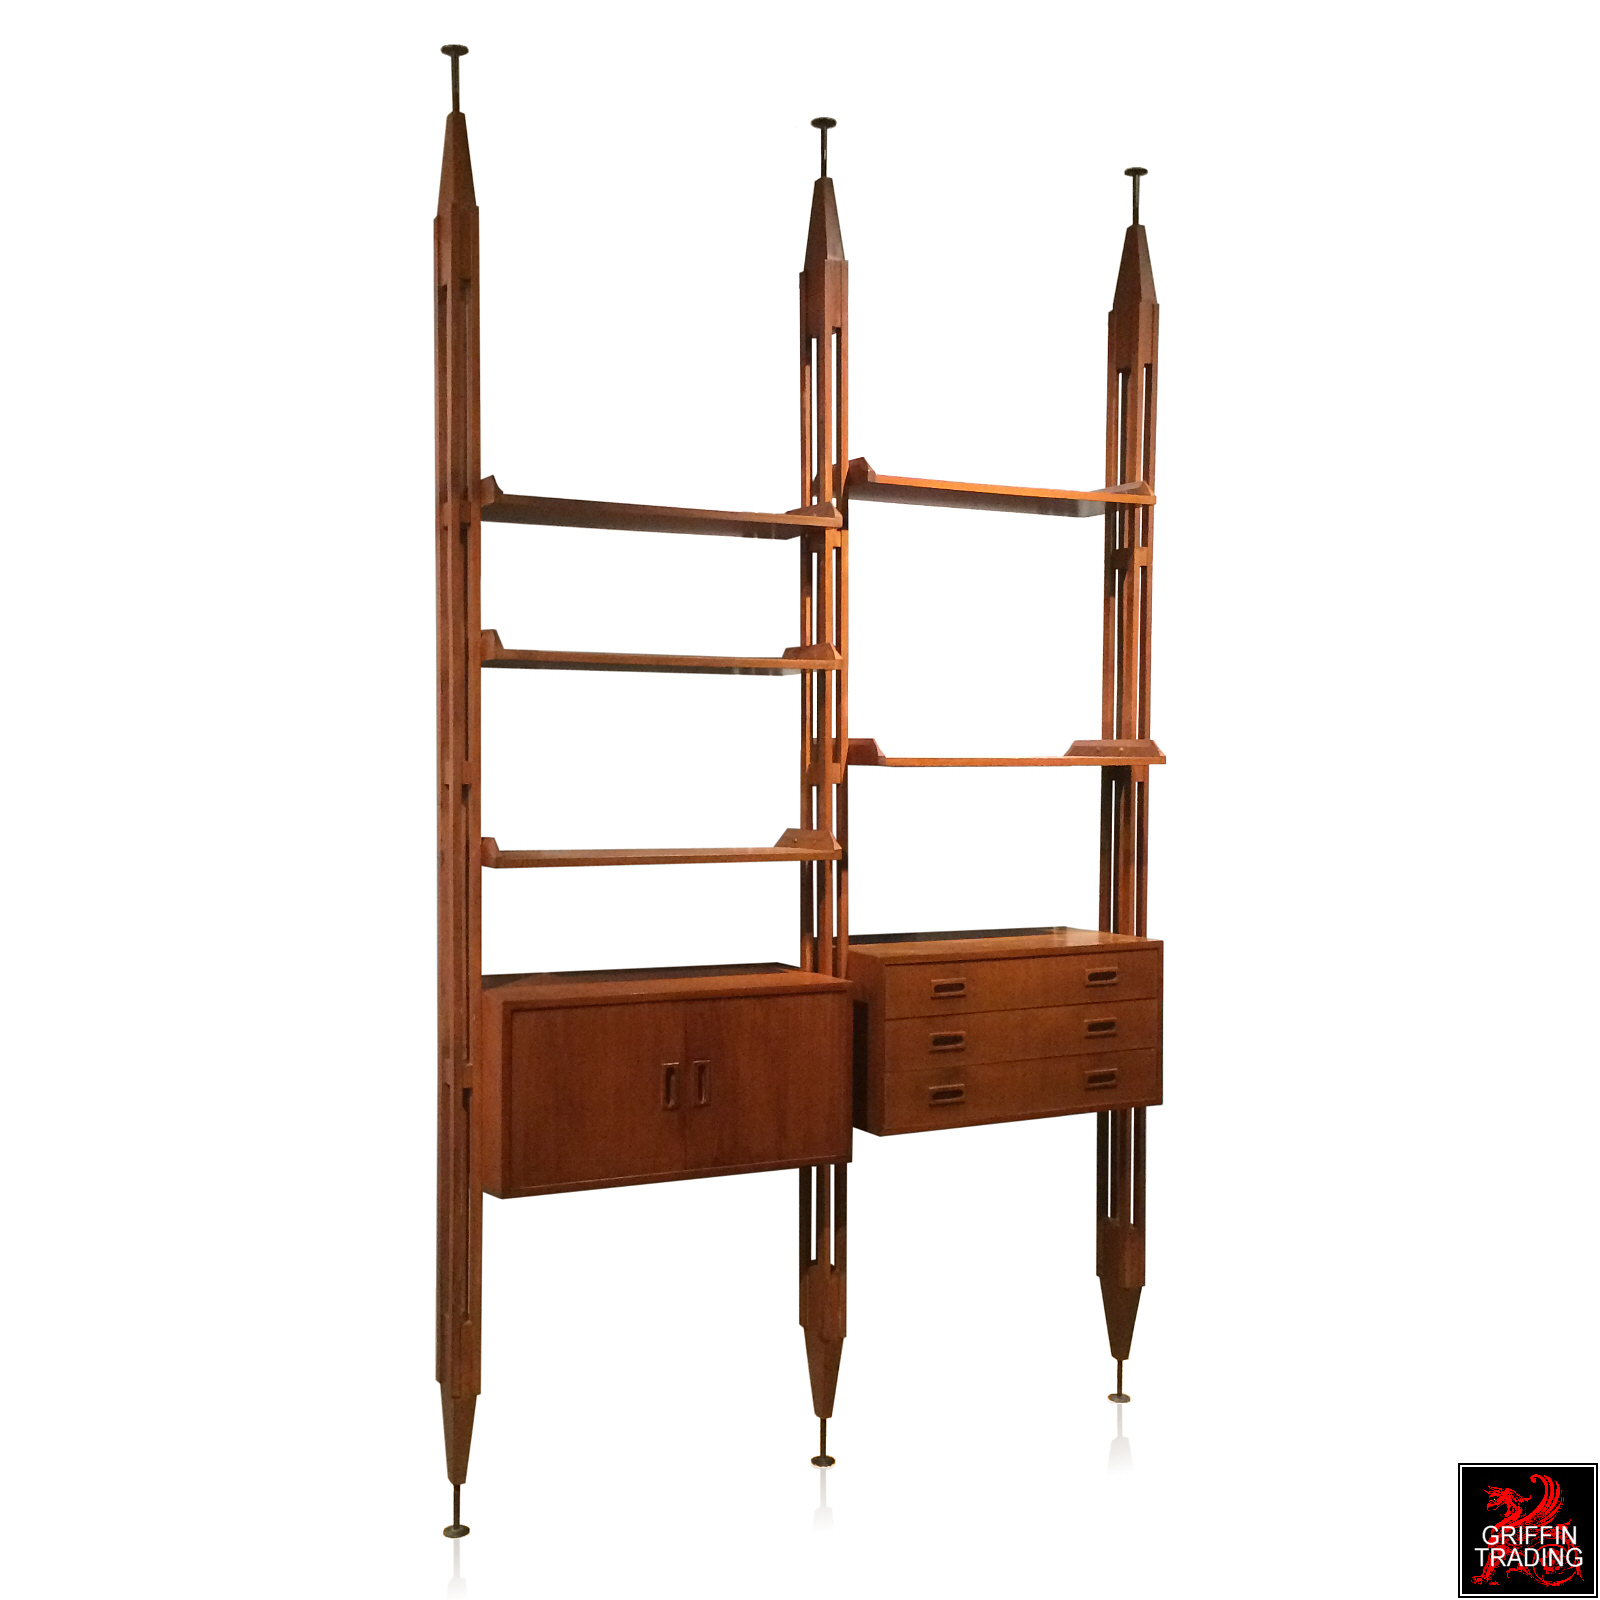 Franco Albini Mid Century Modern Bookcase For Sale At Griffin